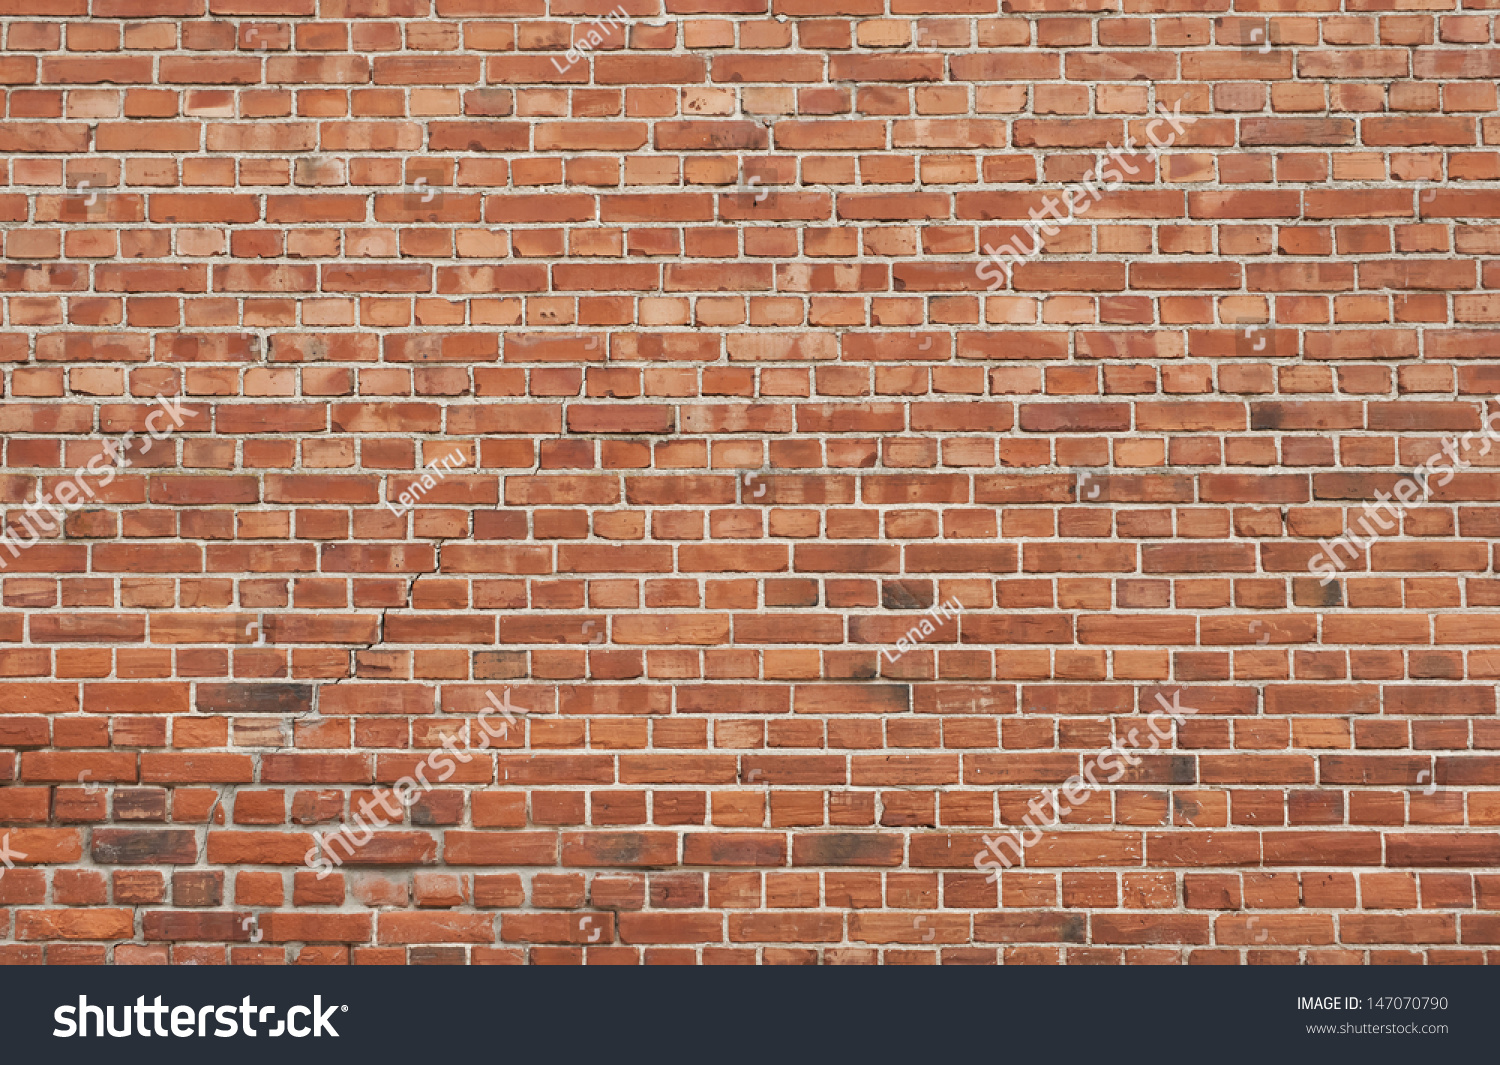 Background of old vintage brick wall #147070790